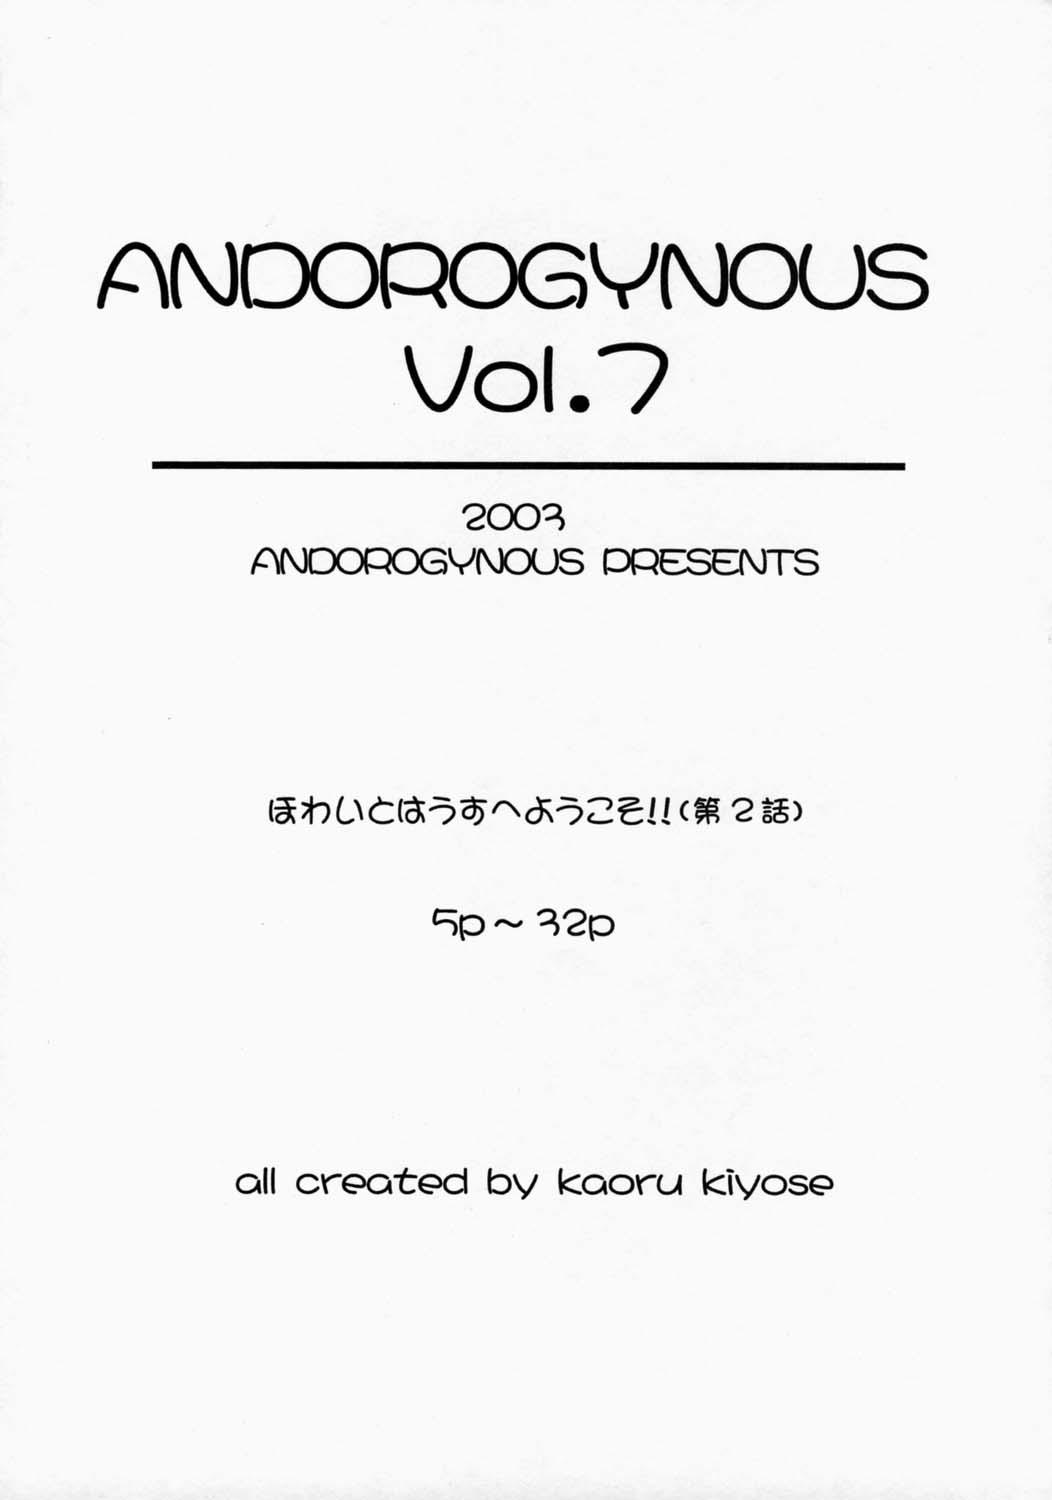 Audition Andorogynous Vol. 7 Home - Page 3